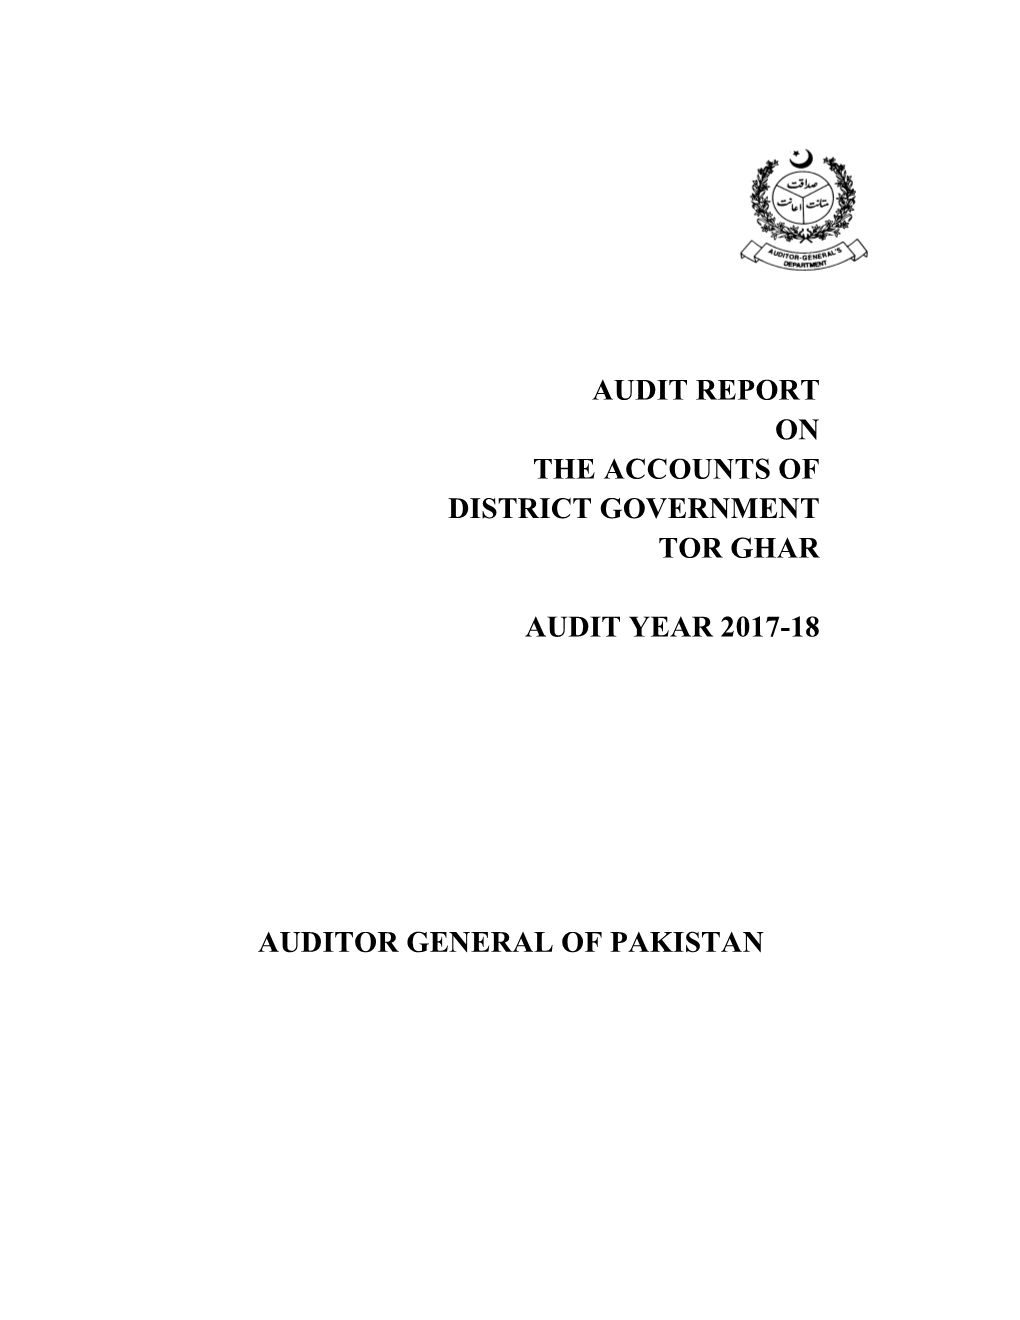 Audit Report on the Accounts of District Government Tor Ghar